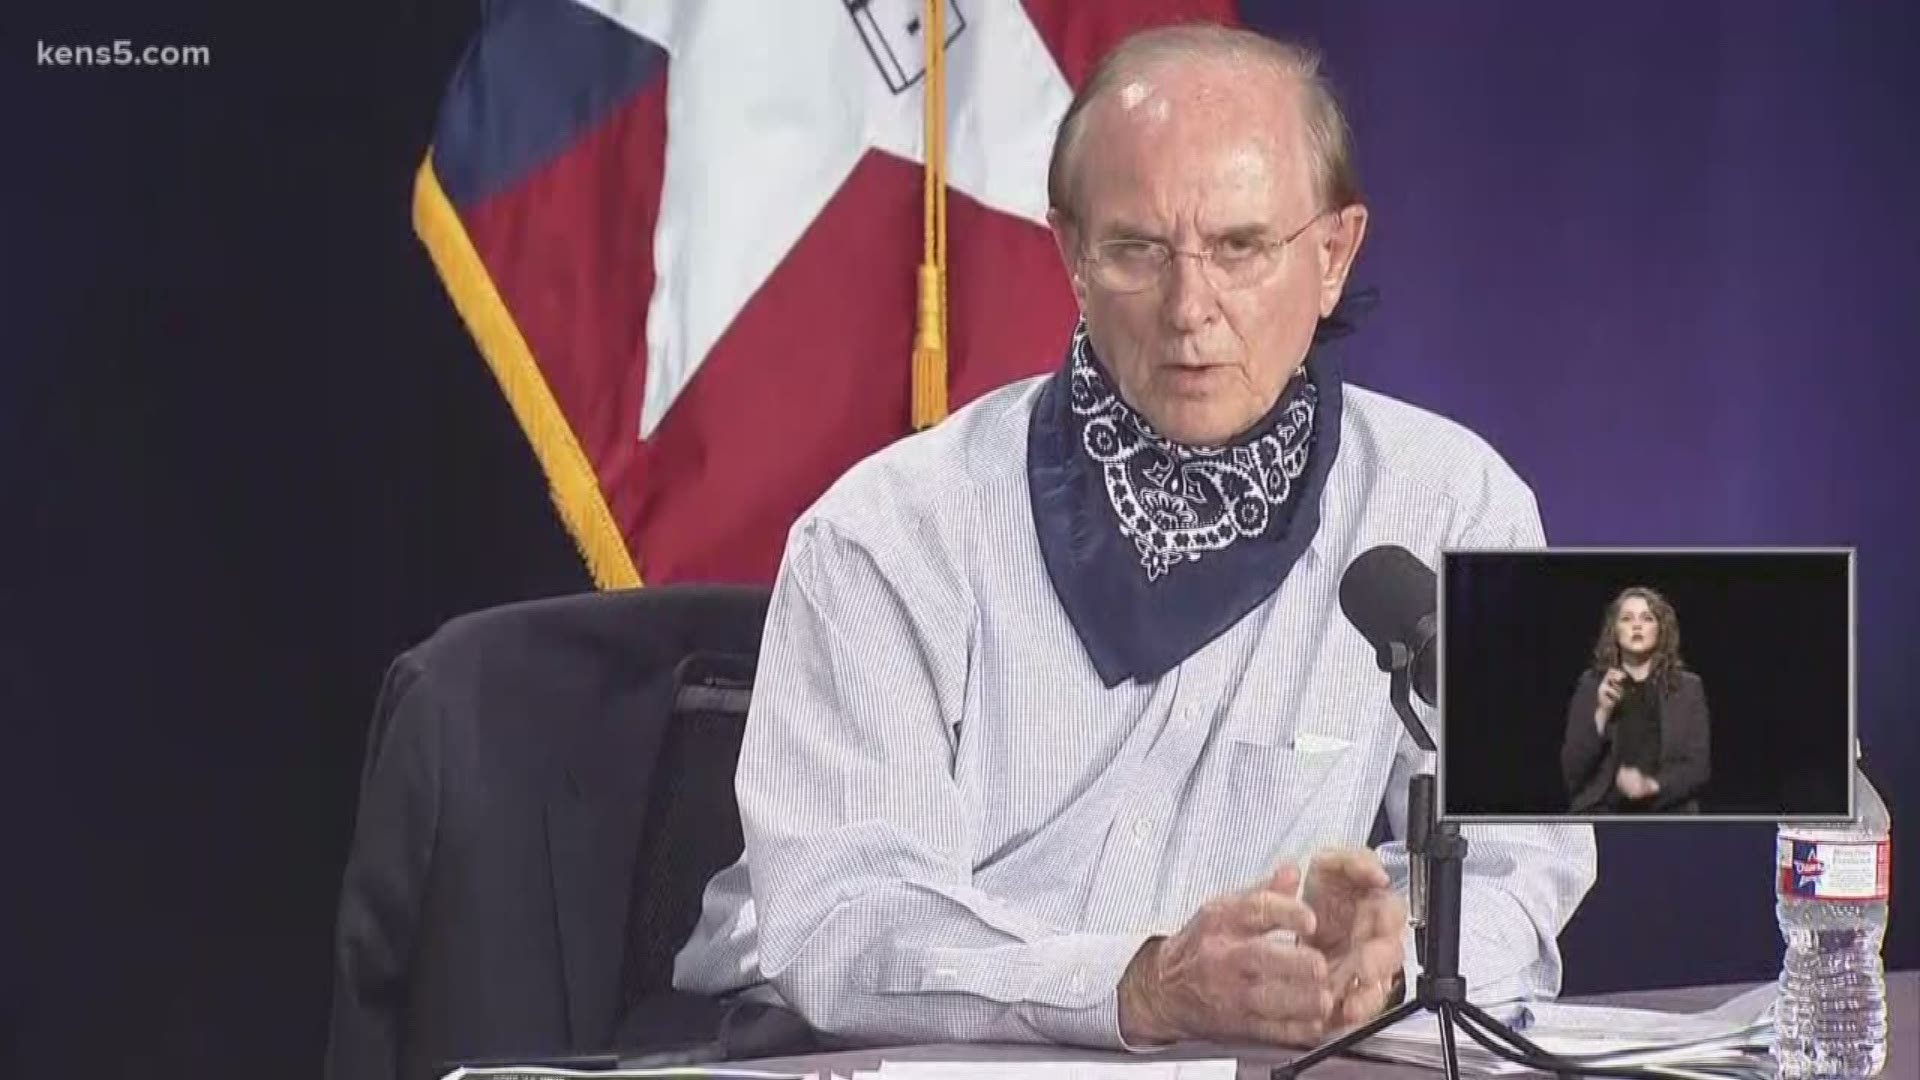 Judge Nelson Wolff said he agreed with much of Governor Abbott's plans to reopen some businesses, but said the worst decision he made was not requiring masks.